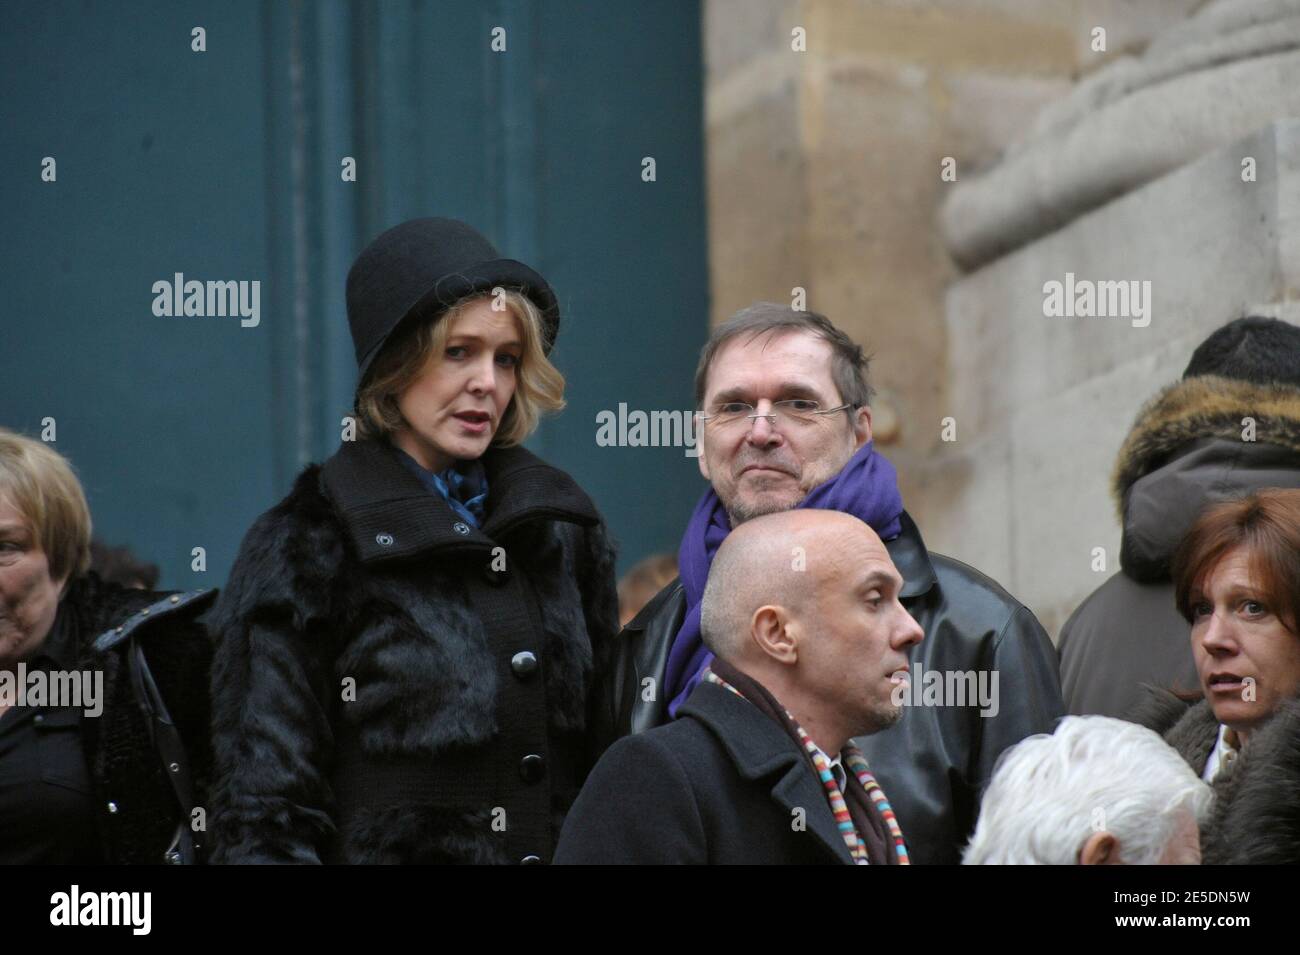 Agnes Soral leaving the Christian Fechner's funeral ceremony held at Saint Roch church in Paris, France on December 1st, 2008. Photo by Gorassini-Taamallah/ABACAPRESS.COM Stock Photo